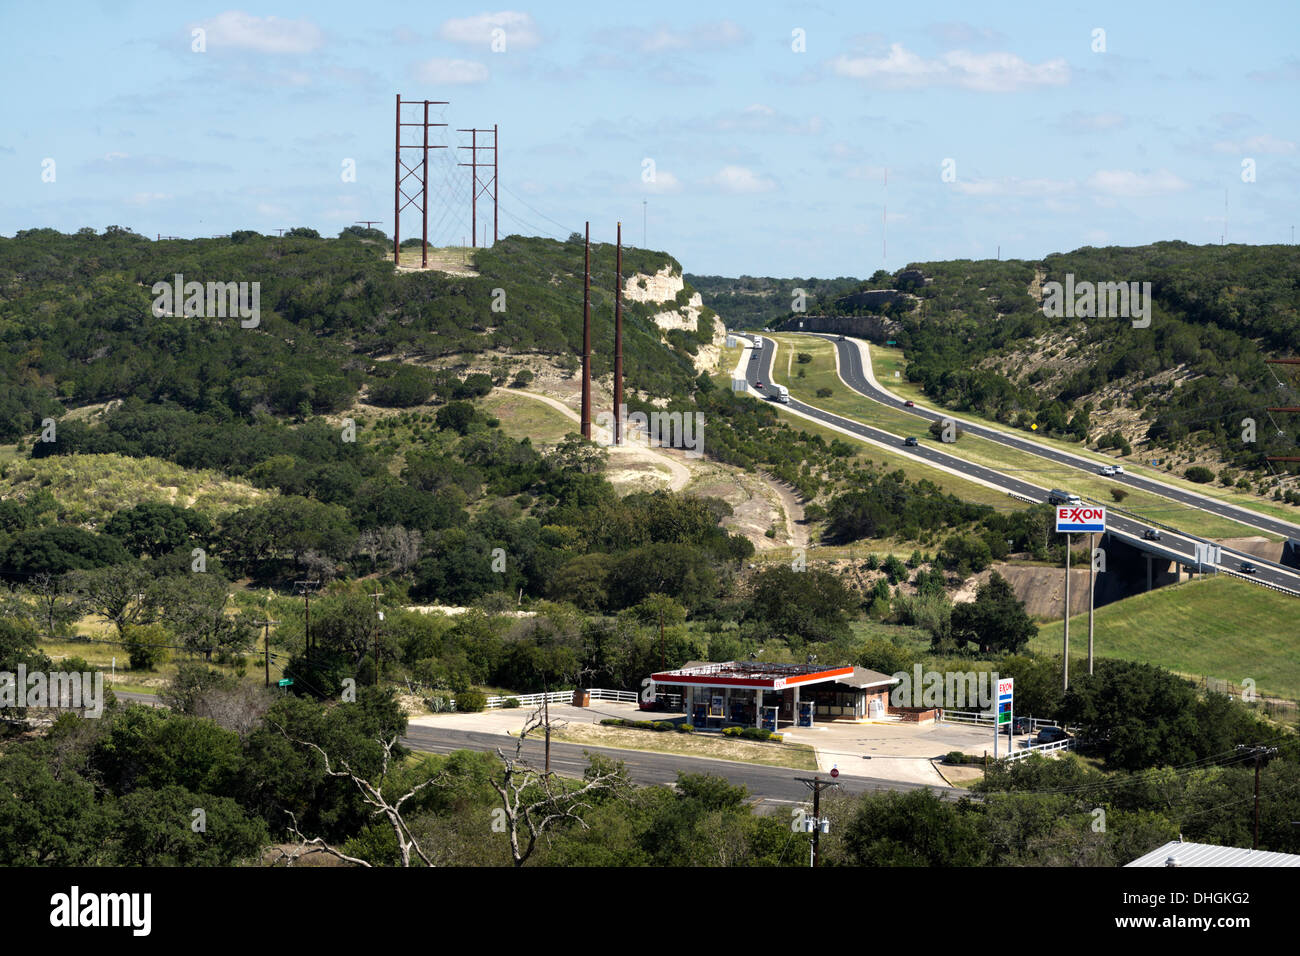 Exxon gas station in the hill country of west Texas near Kerrville next to Interstate 10. Stock Photo